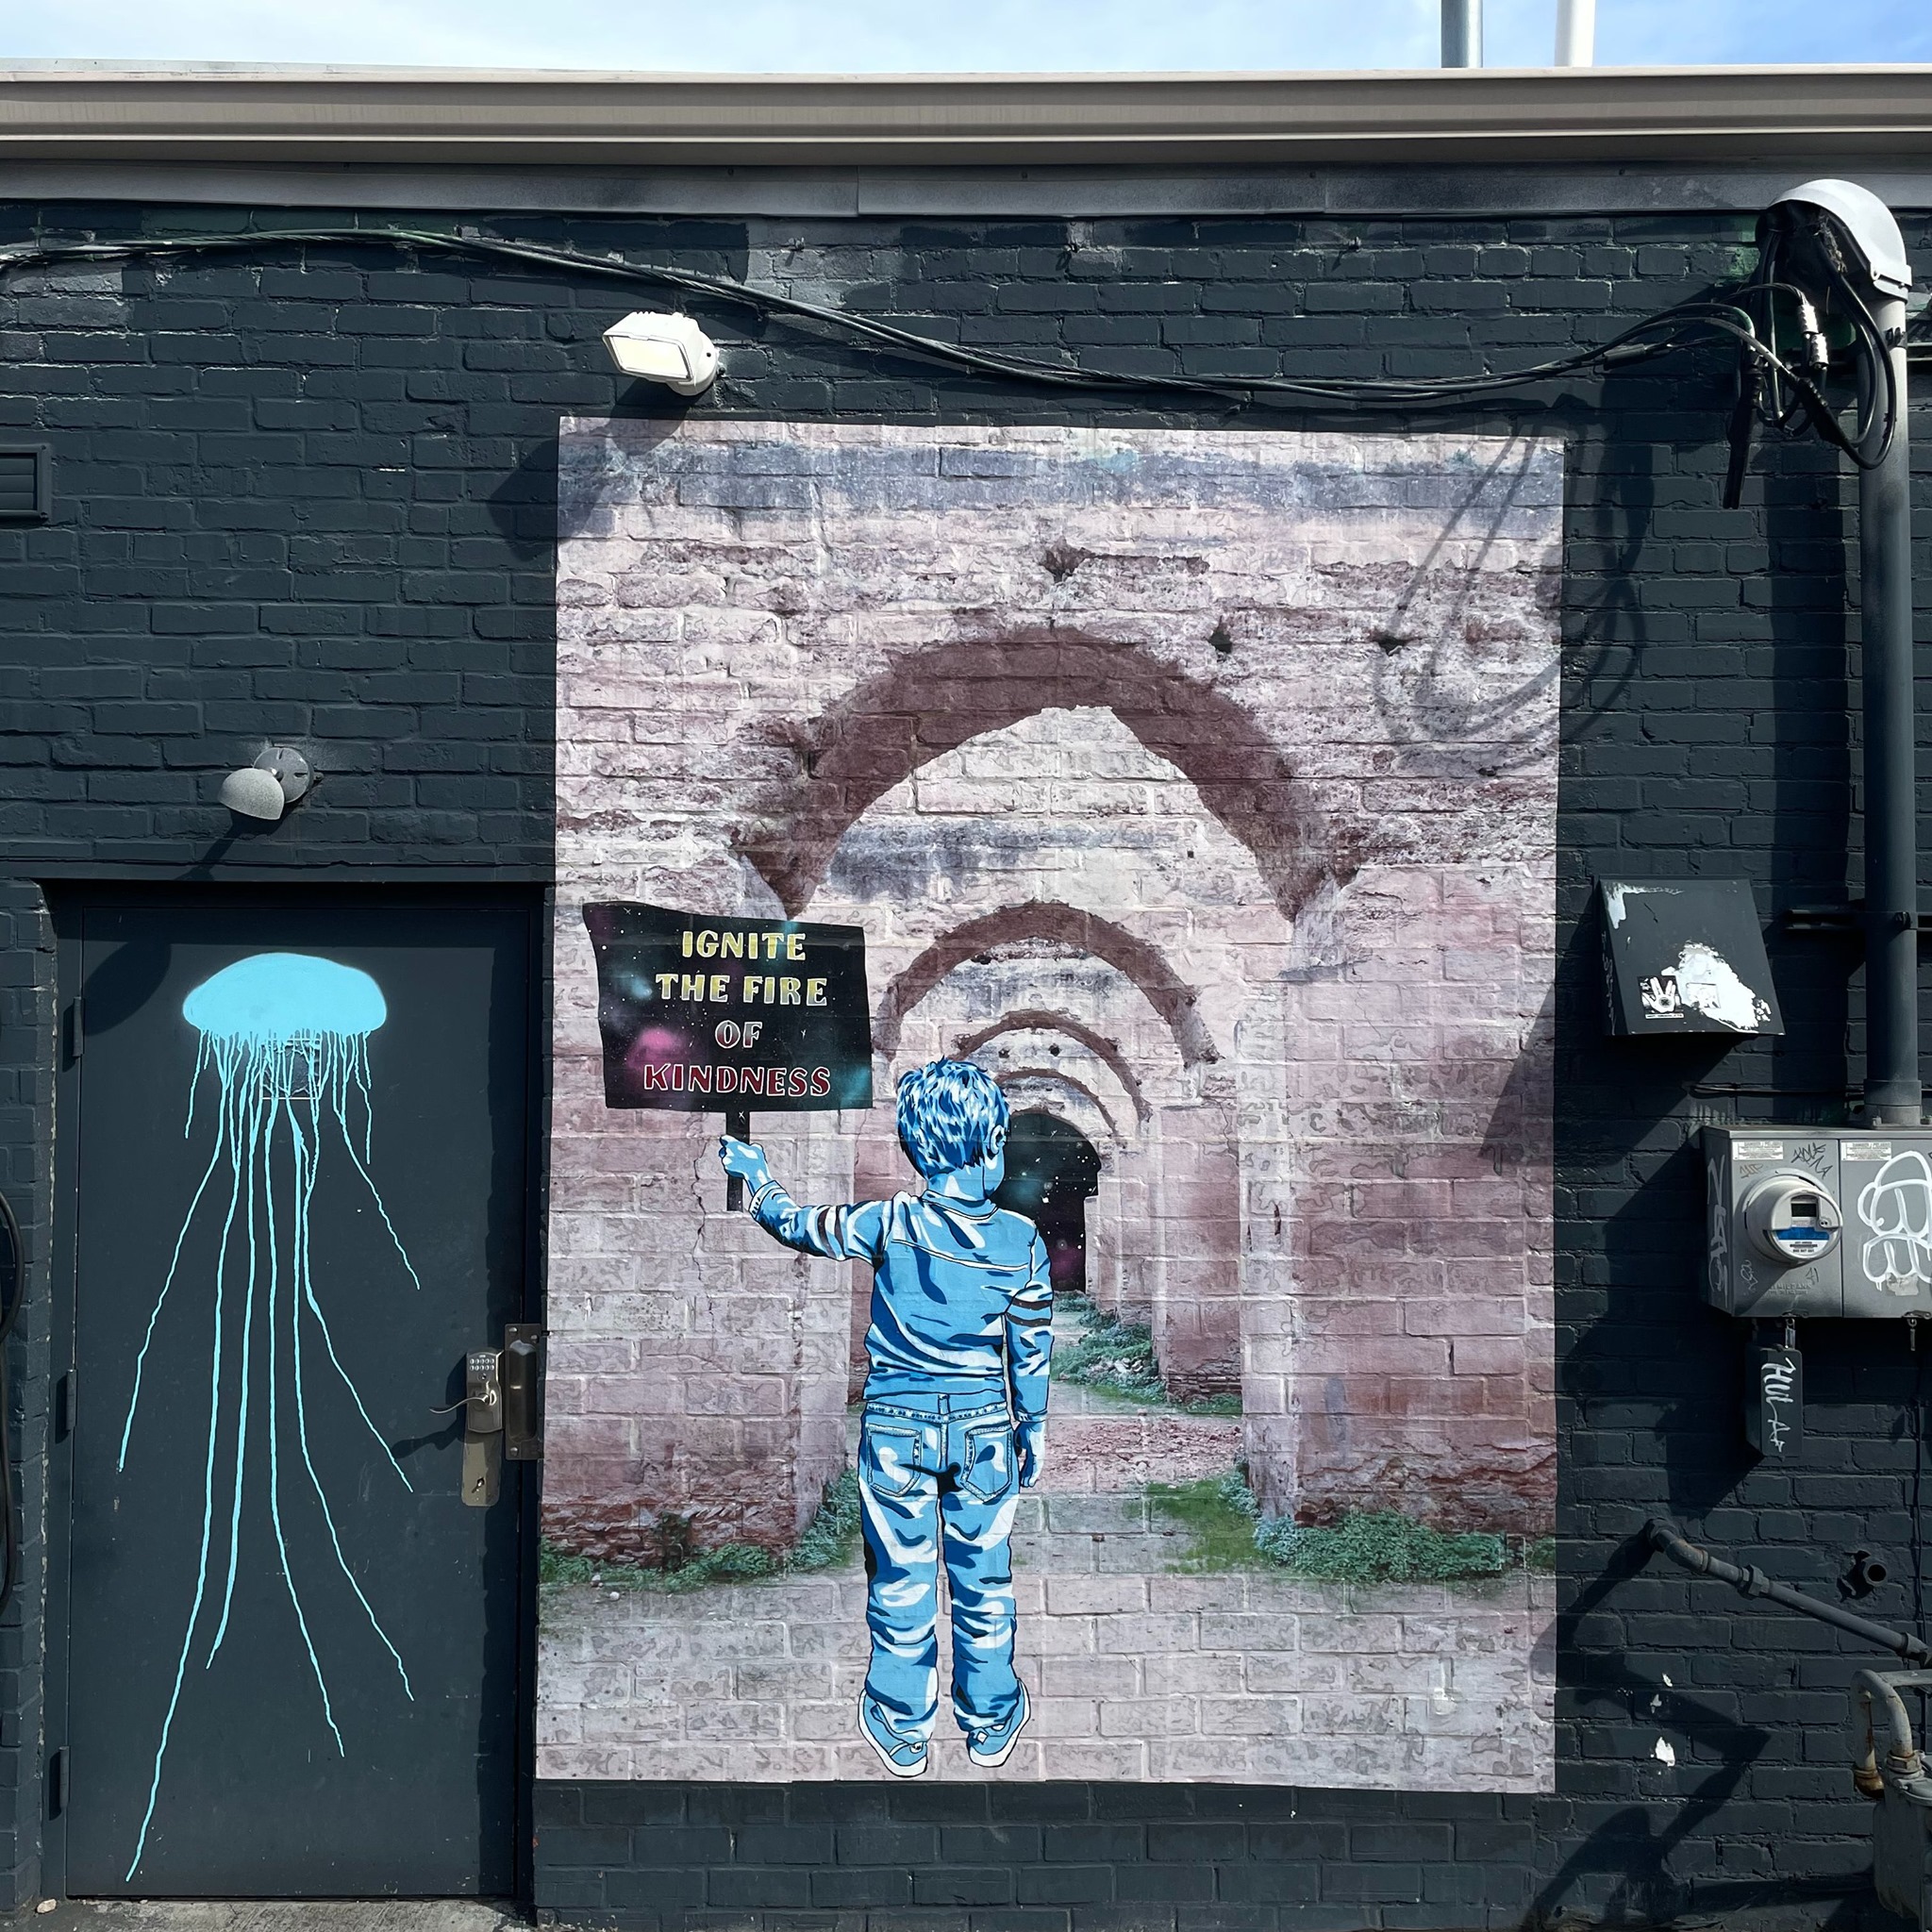 Stephanie Rond’s murals and street art are infused with messages of compassion and community. Pictured here is the mural titled “Echoes of Kindness,” and it can be seen on the corner of Hudson & Summit in Columbus, Ohio.  